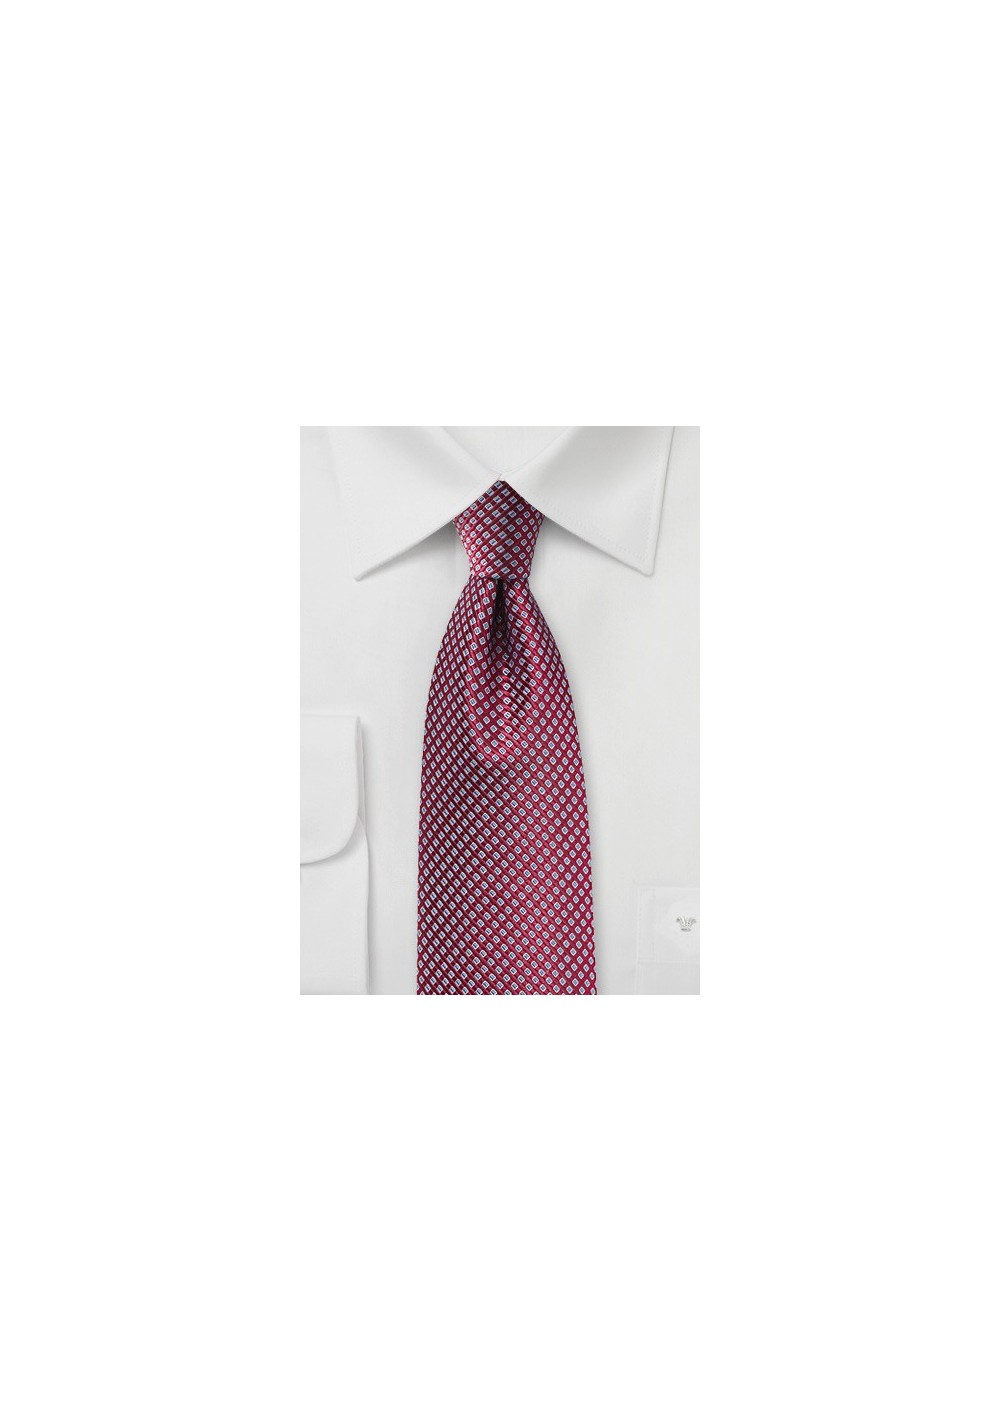 Micro Check Tie in Red and Blue